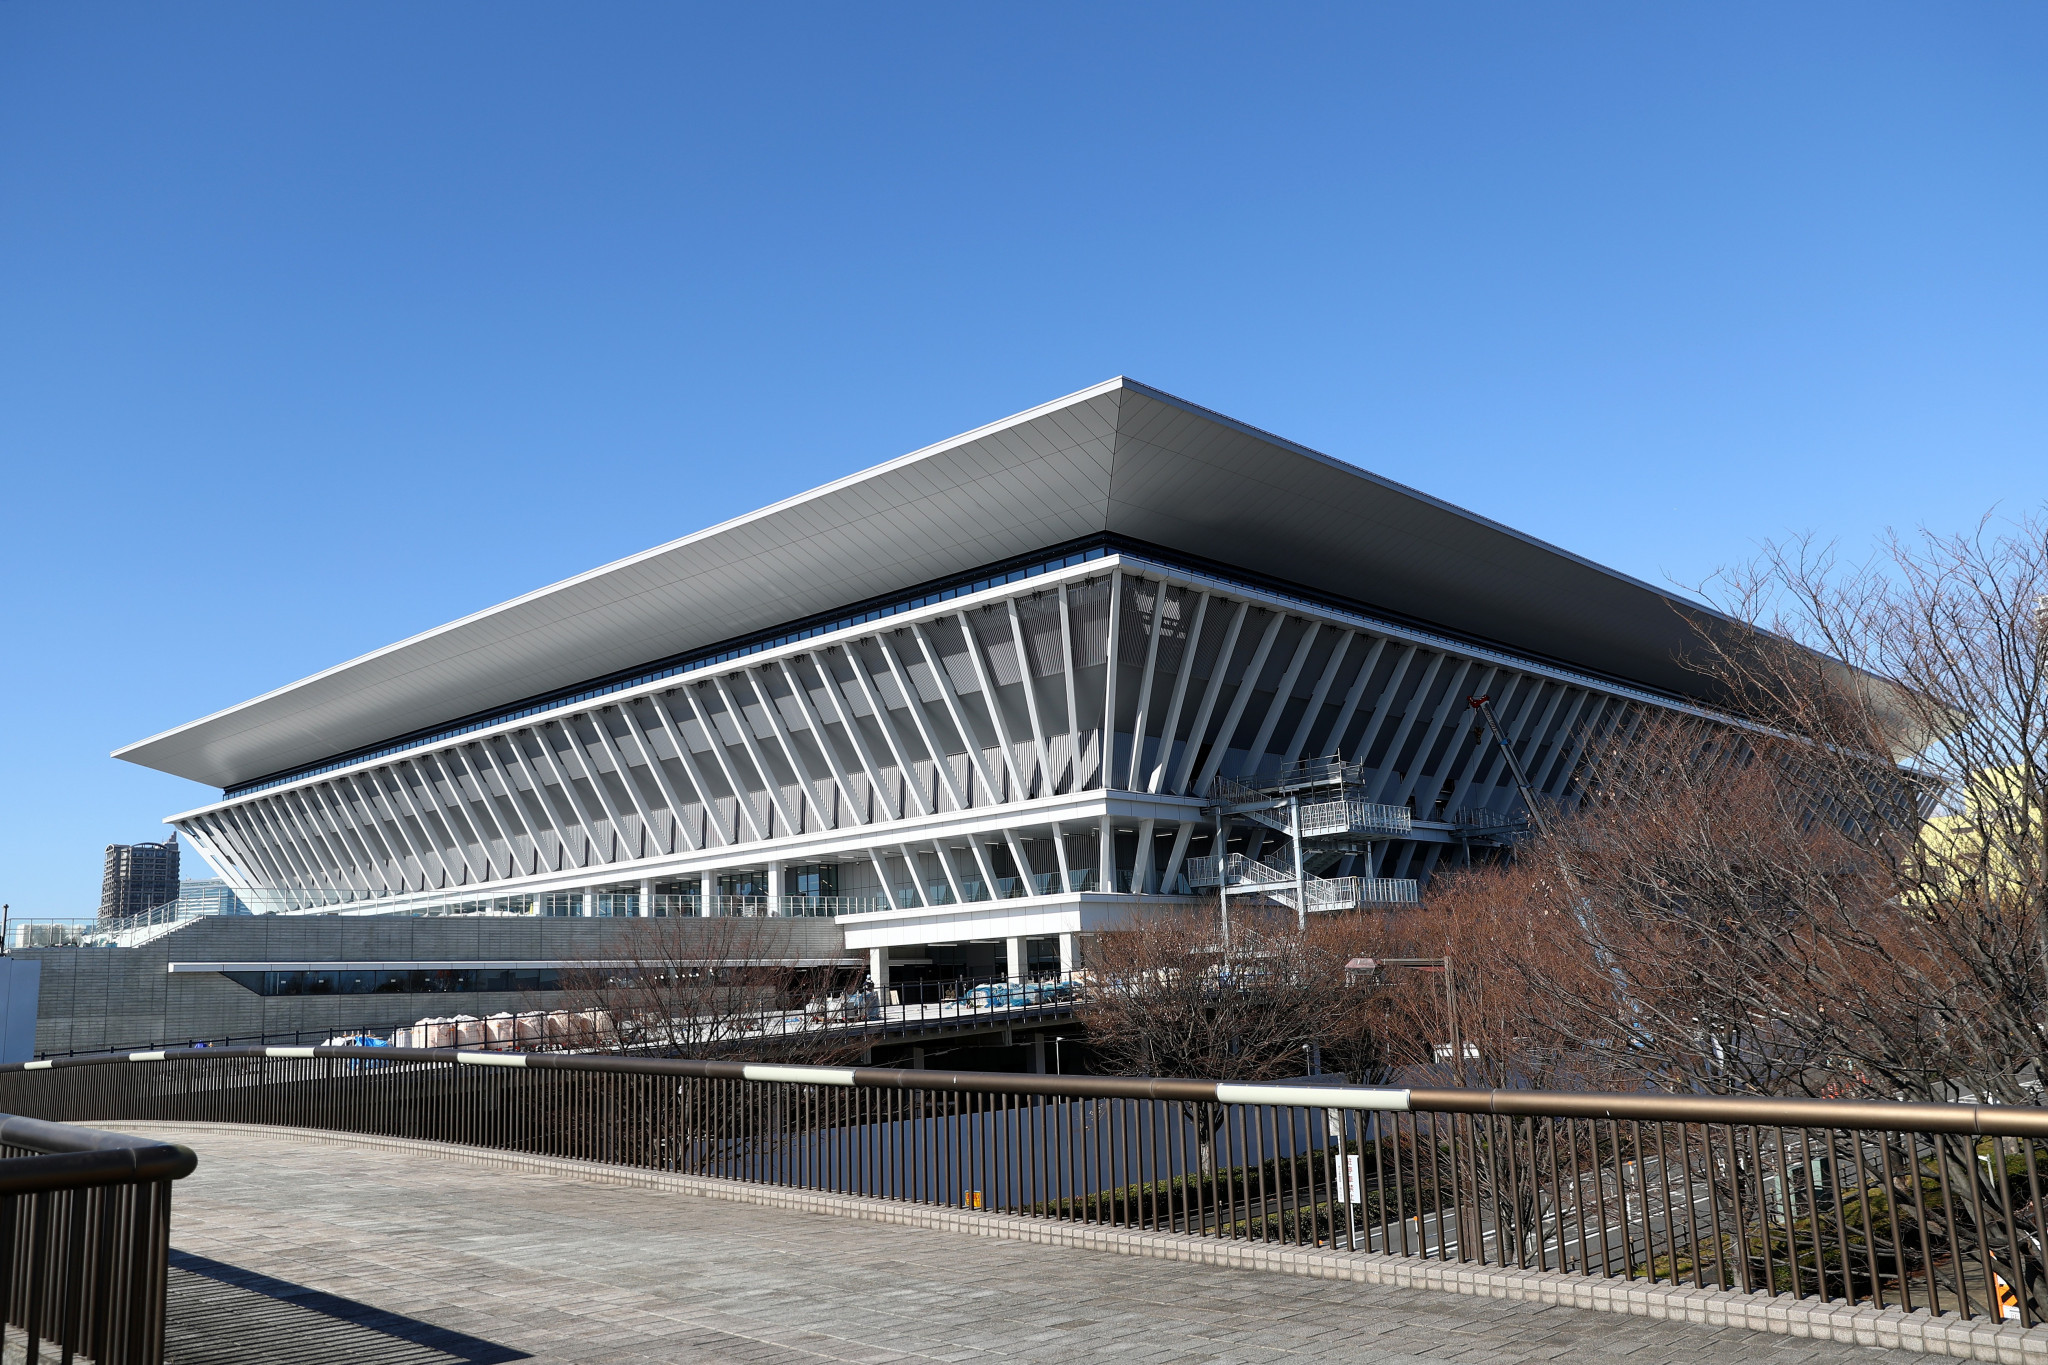 Tokyo 2020 announces all new permanent venues finished on schedule as Aquatics Centre completes list